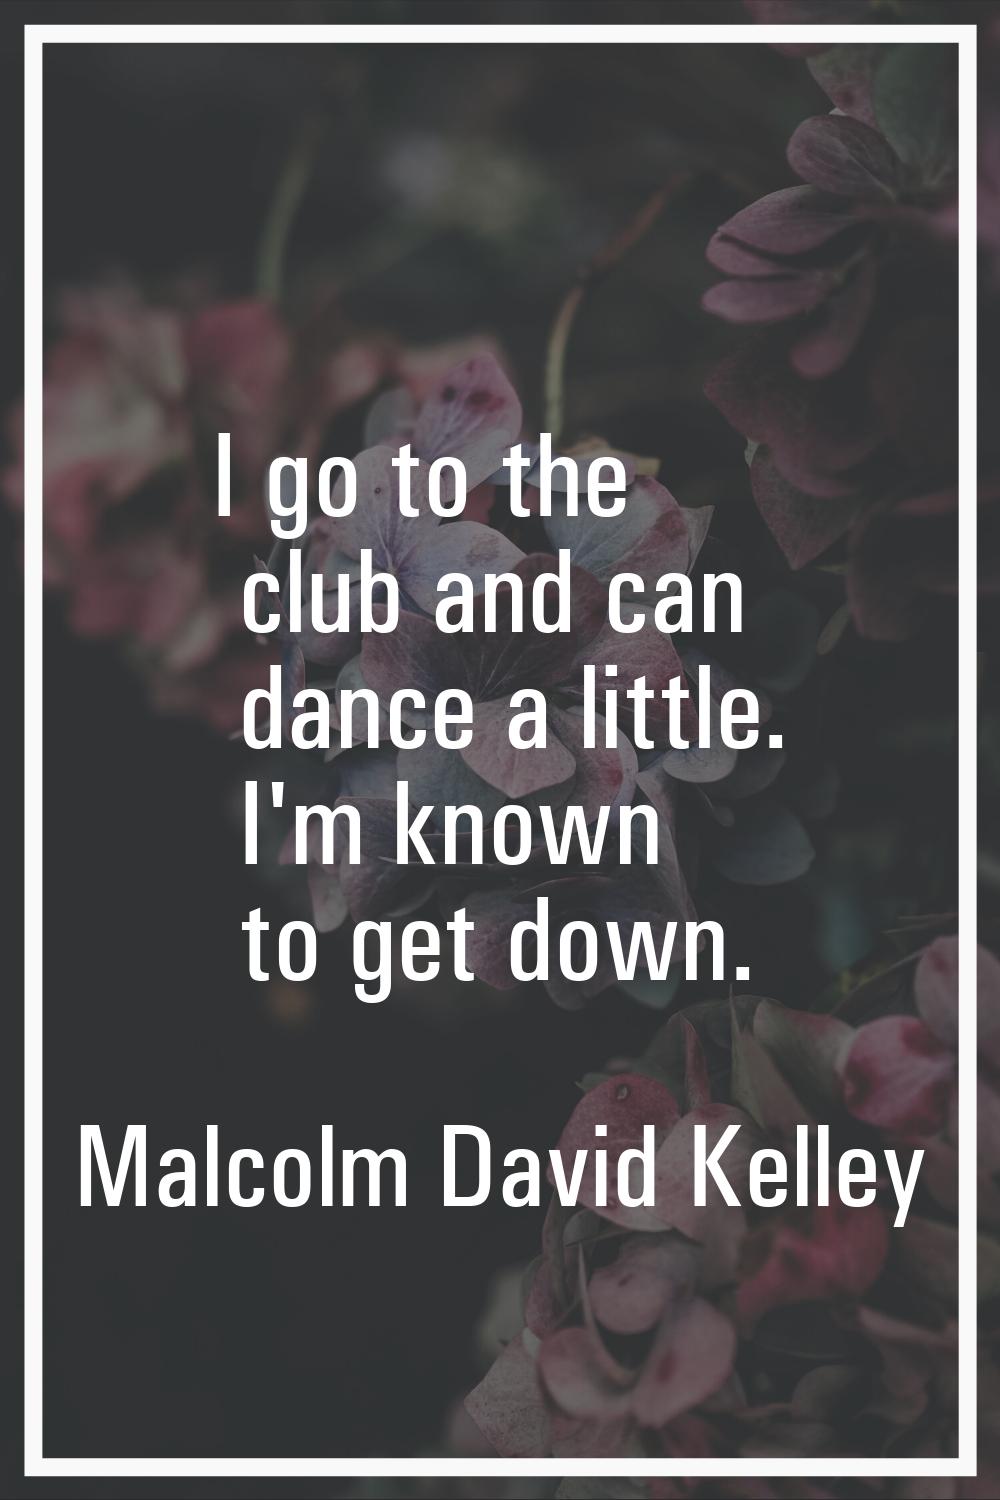 I go to the club and can dance a little. I'm known to get down.